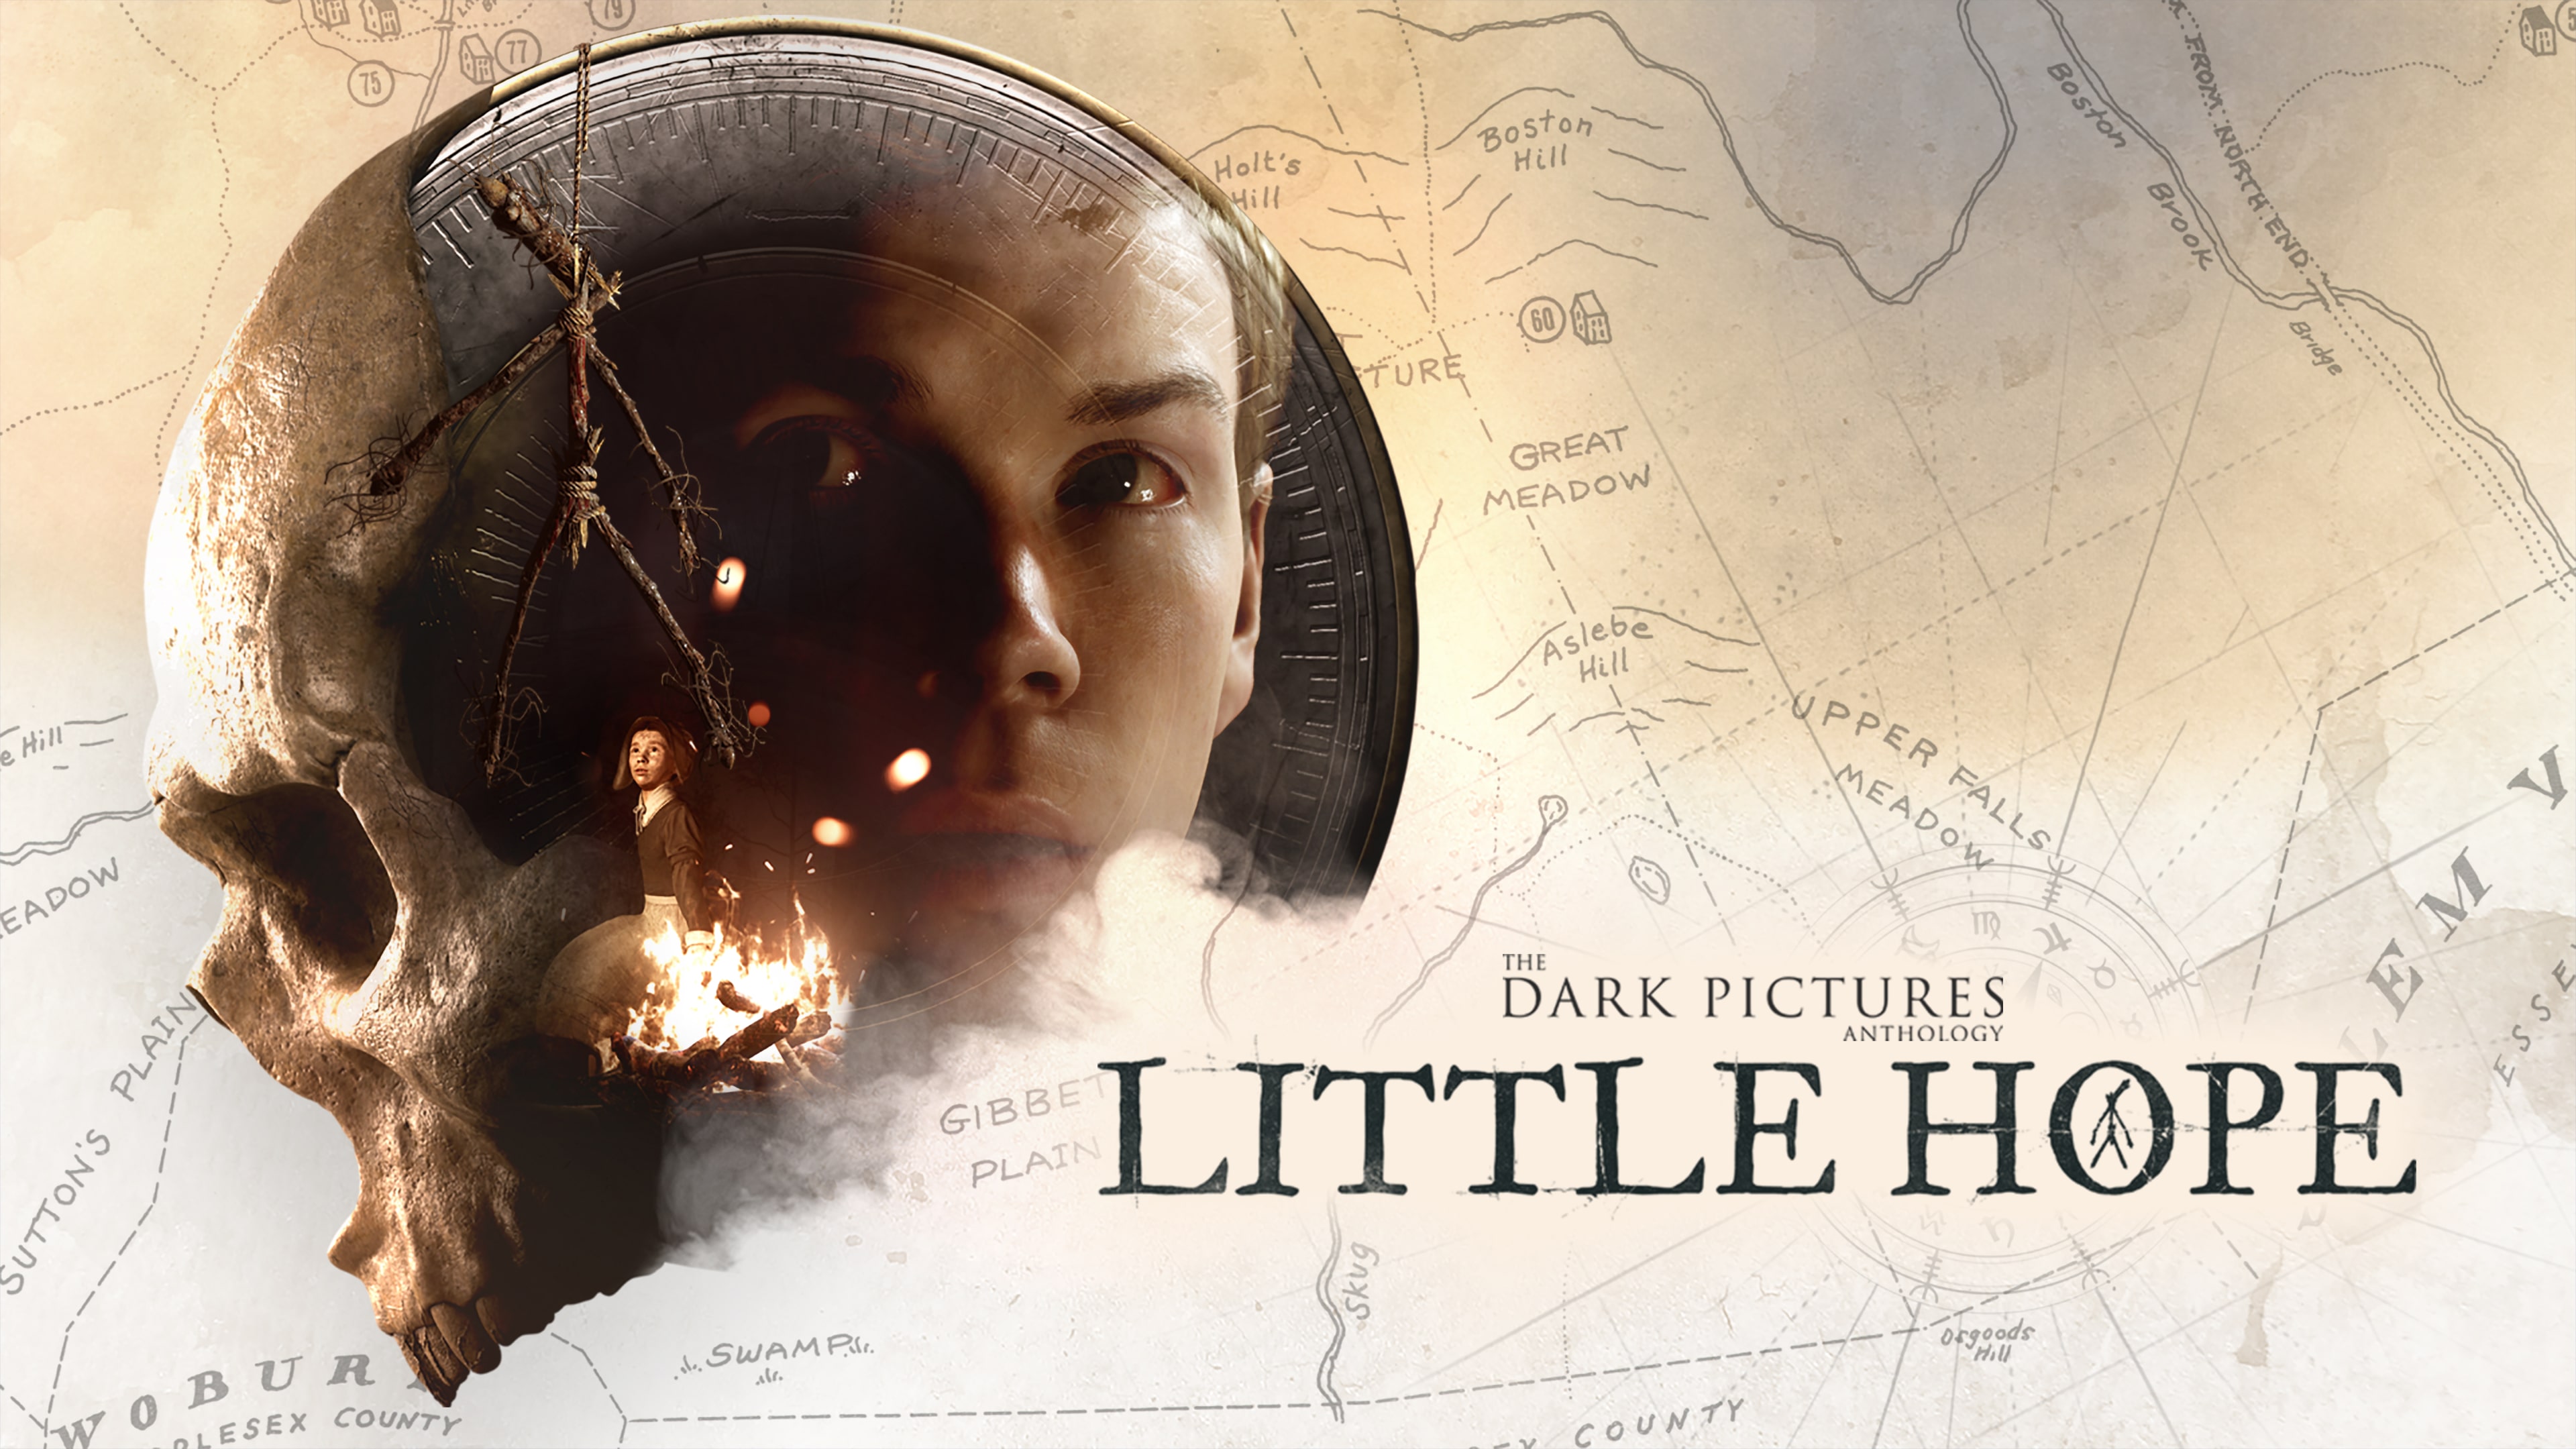 The Dark Pictures Anthology: Little Hope (Simplified Chinese, Korean, Traditional Chinese)